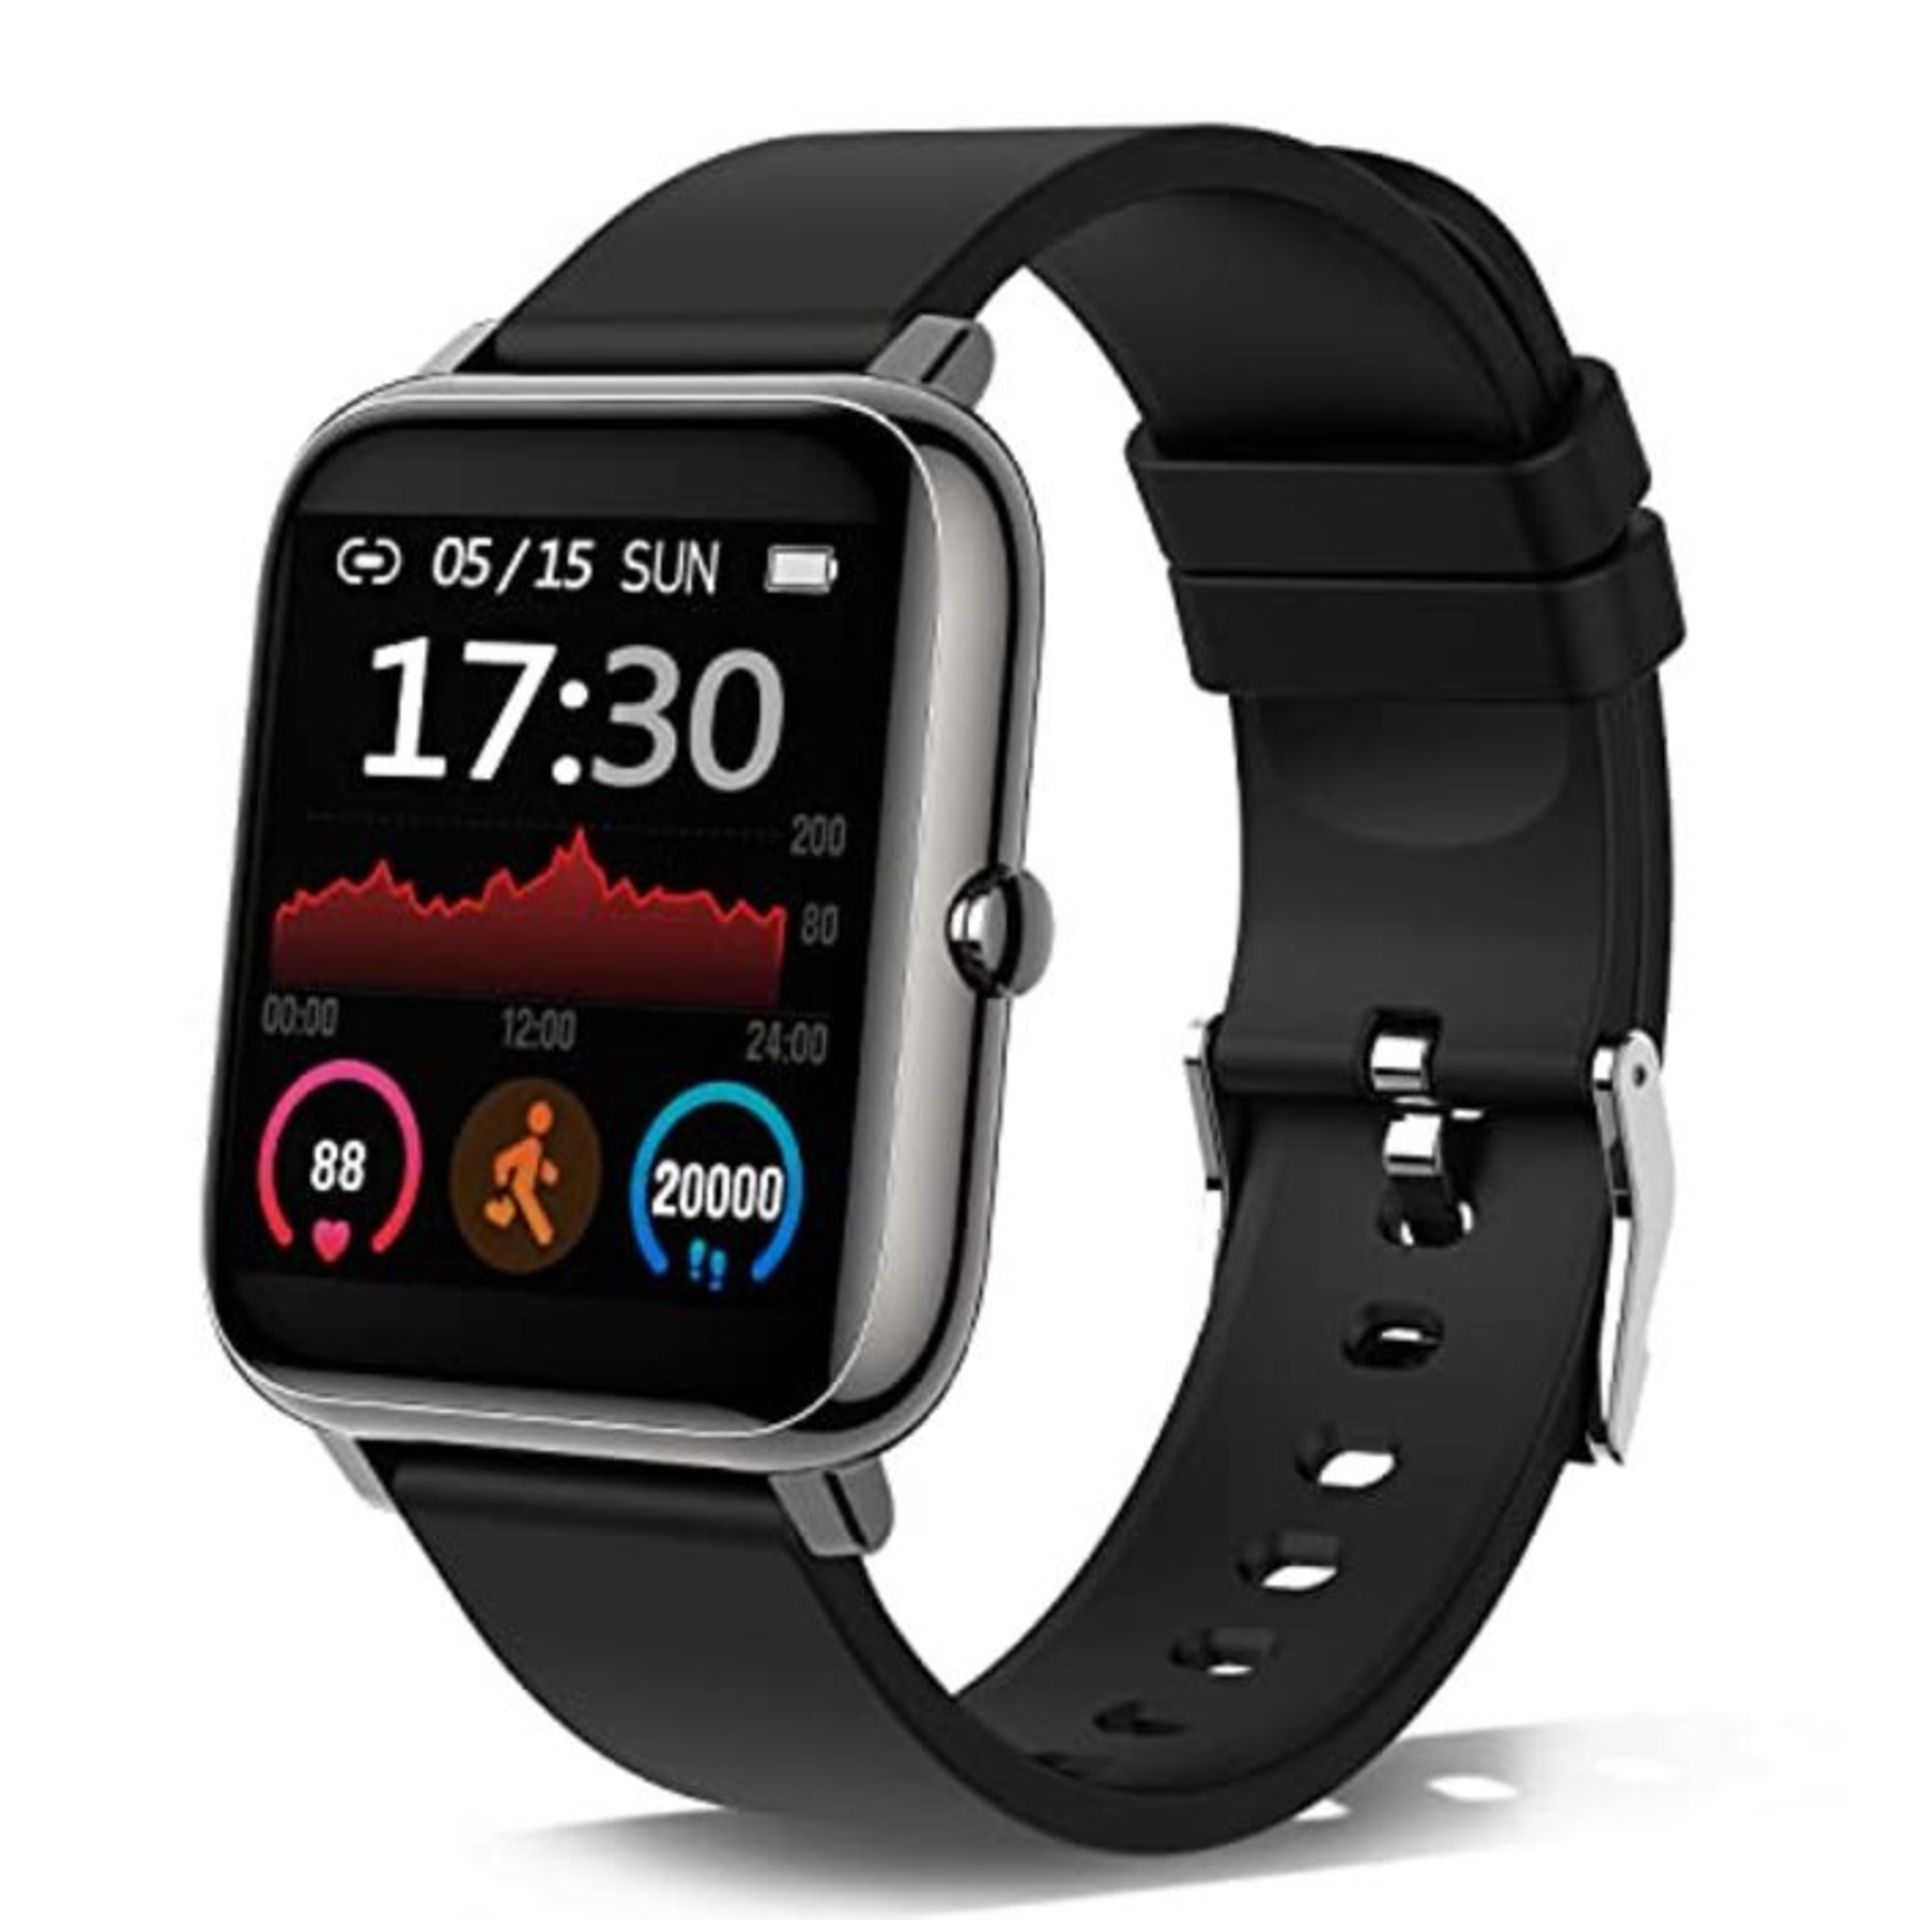 Donerton Smart Watch, Fitness Tracker for Women, 1.4" TFT LCD Screen Smartwatch with H